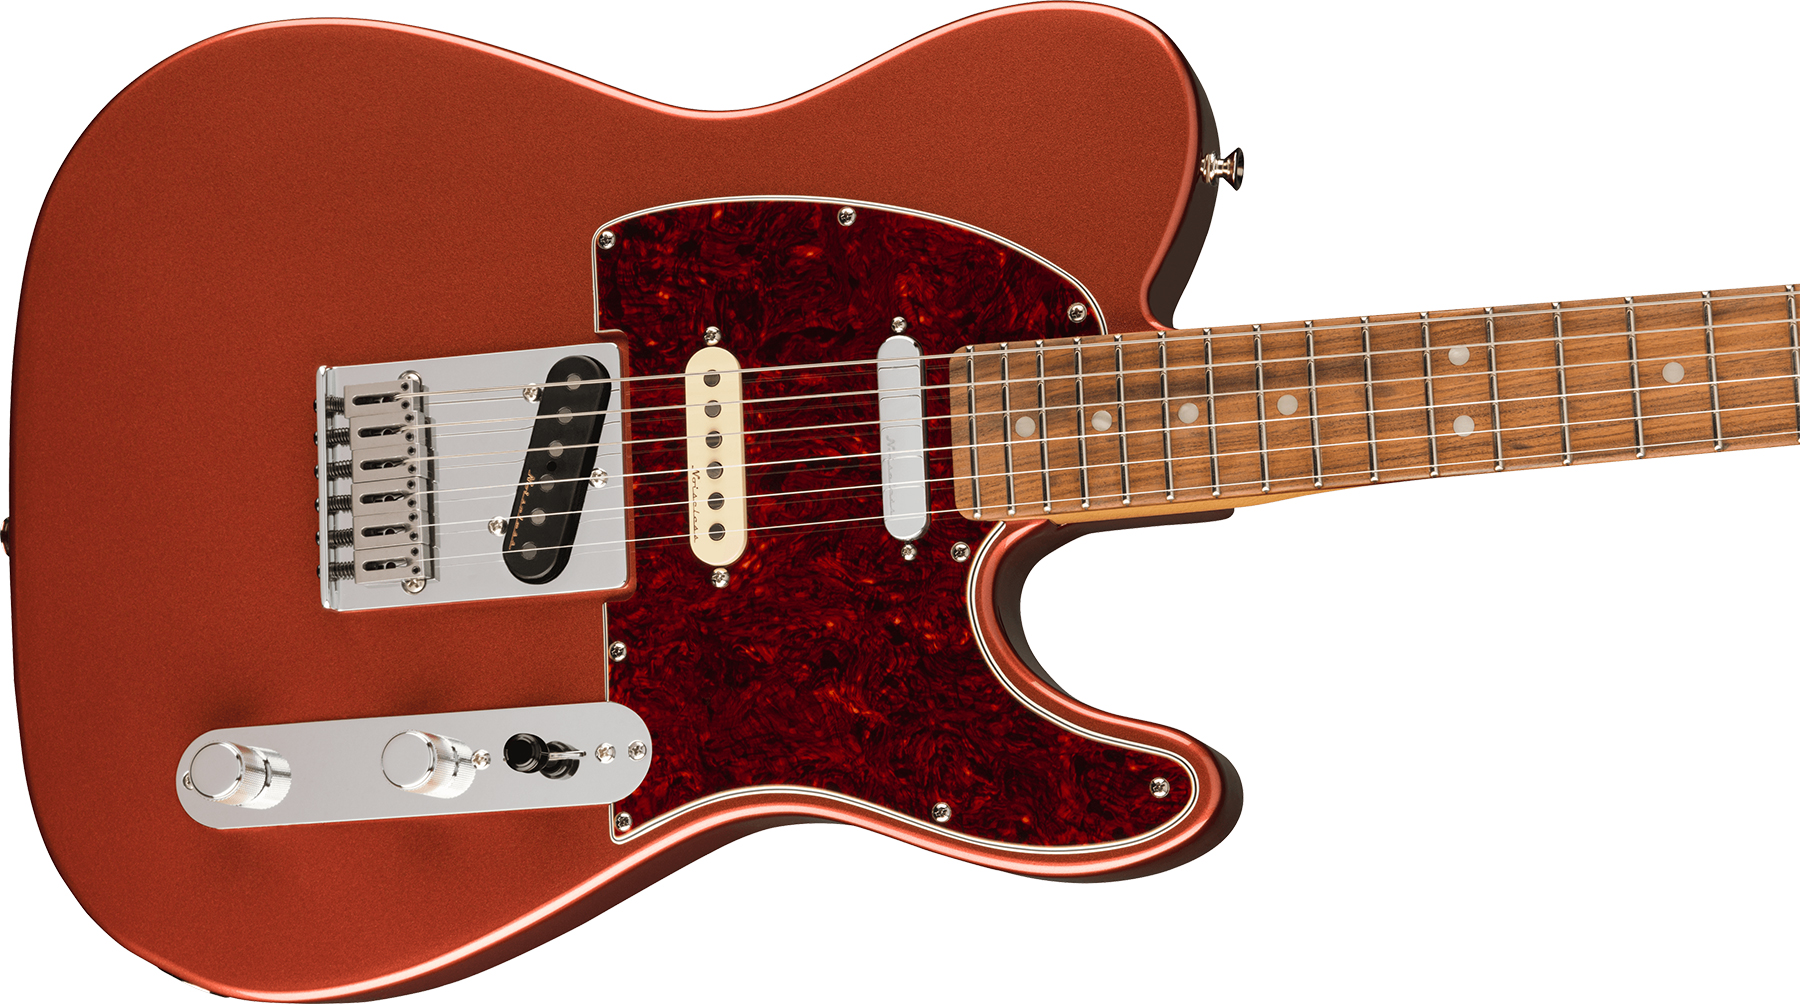 Fender Tele Player Plus Nashville Mex 3s Ht Pf - Aged Candy Apple Red - Tel shape electric guitar - Variation 2